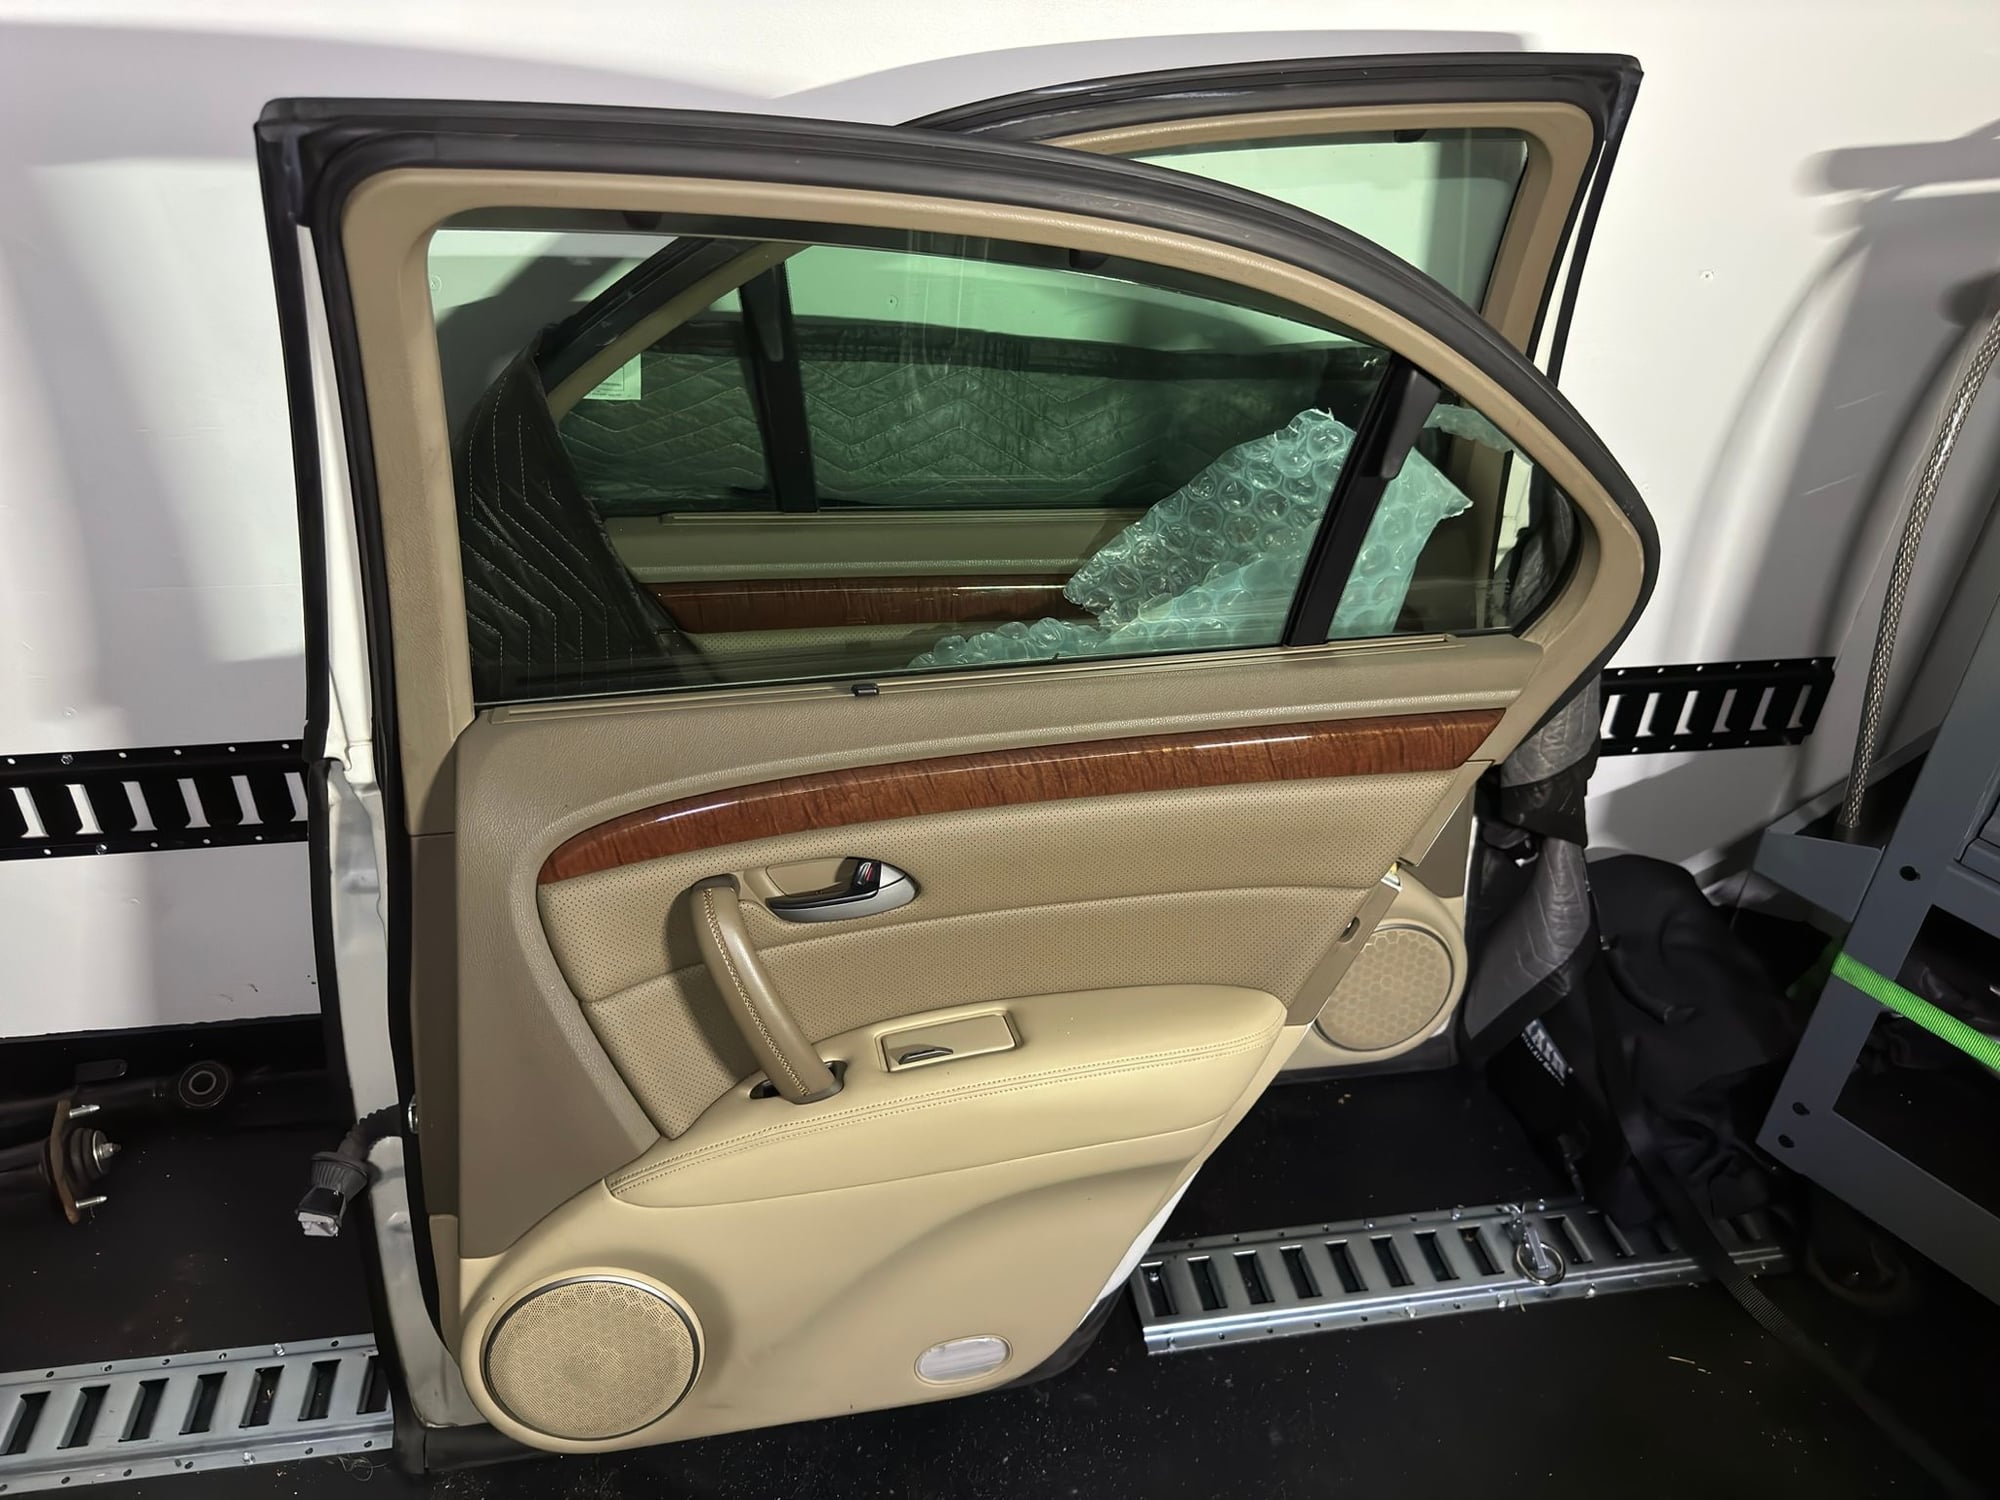 2006 Acura RL - RR DOOR COMPLETE - Accessories - $150 - Katy, TX 77494, United States